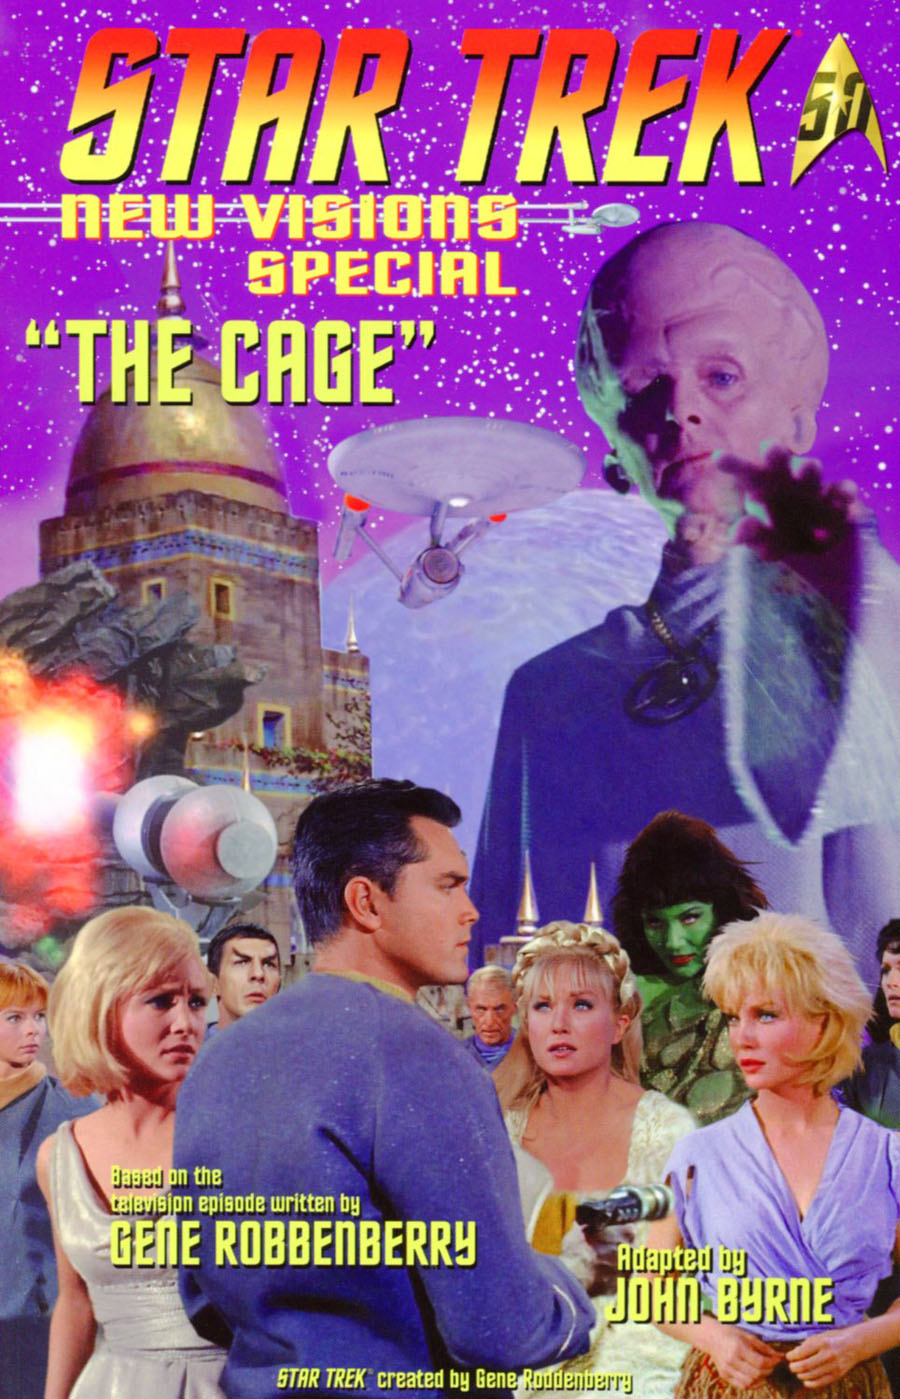 Star Trek New Visions Special The Cage